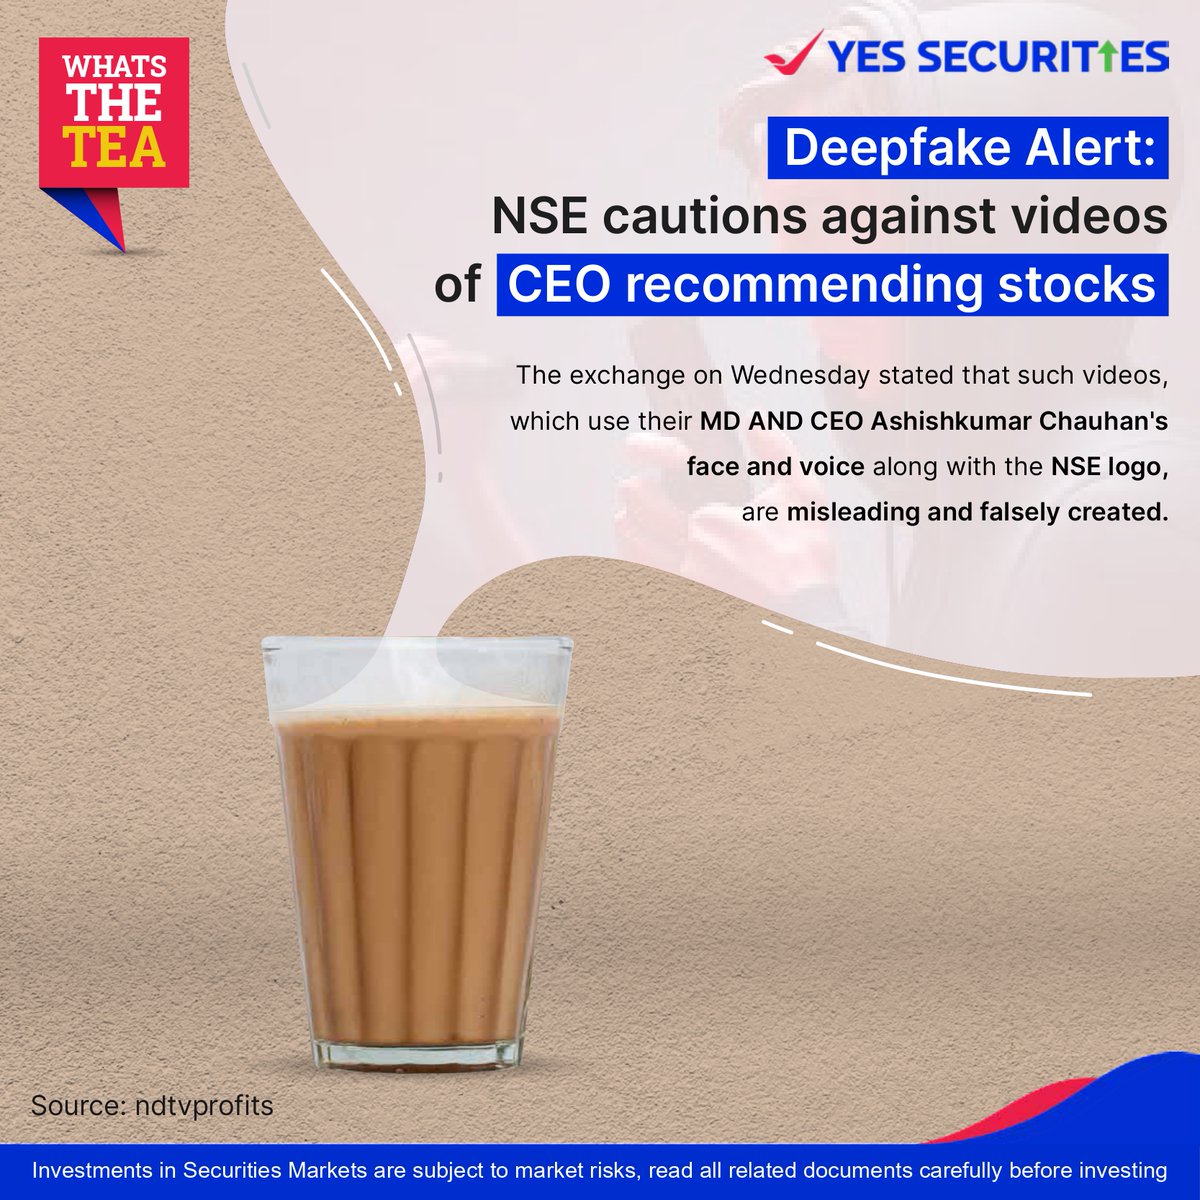 Here's the tea of the week, catch you with some more later.☕

Disclaimer: bit.ly/3yKOHTh

#YESSECURITIES #ChoiceoftheWize #WhatsTheTea #WeeklyNews #News #WeeklyWrap #NewsUpdate